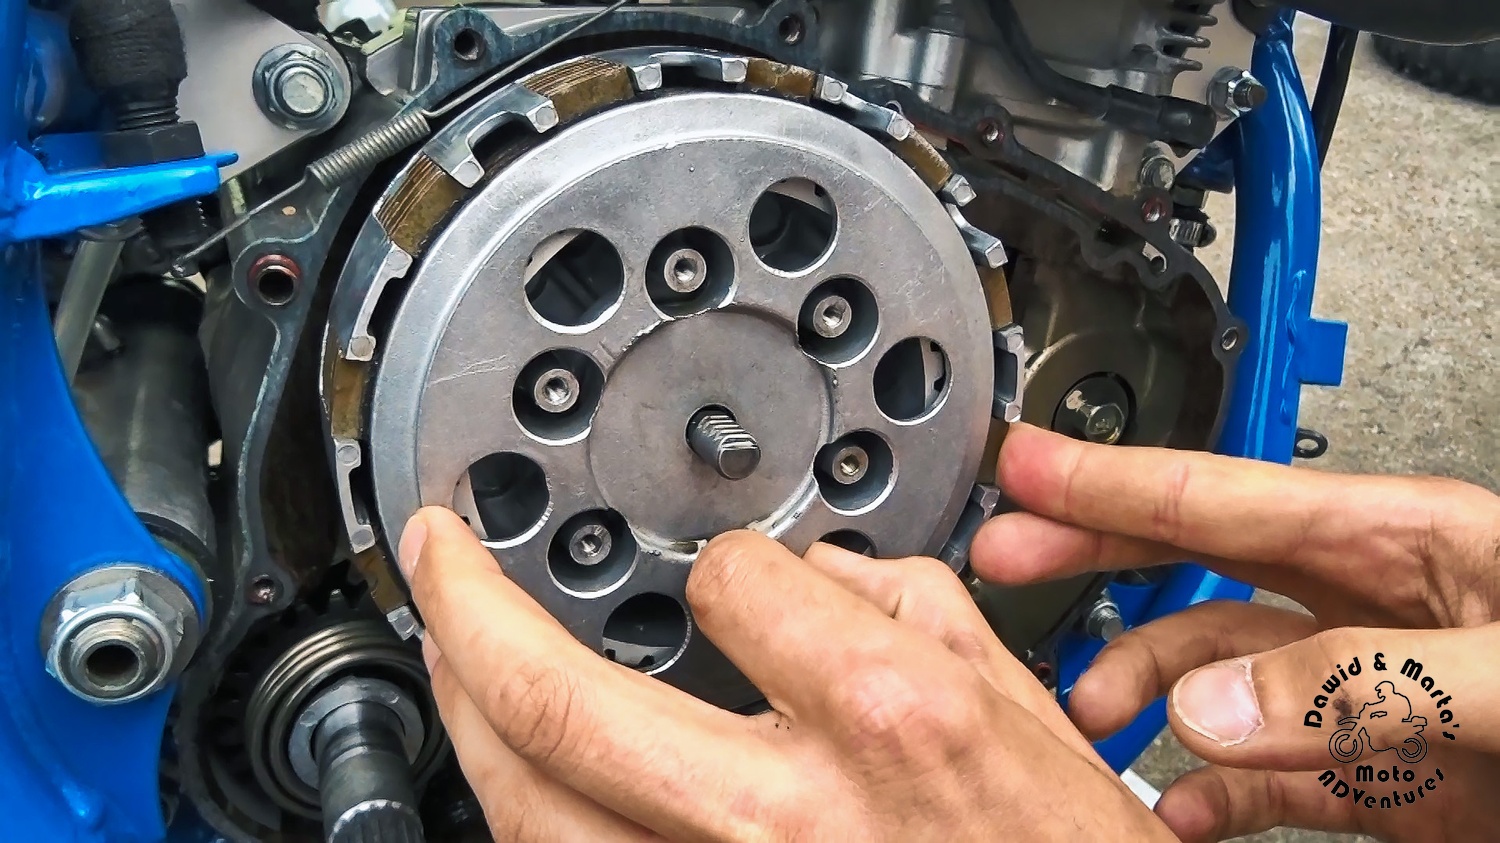 Removing the clutch basket pressure disc in DR350